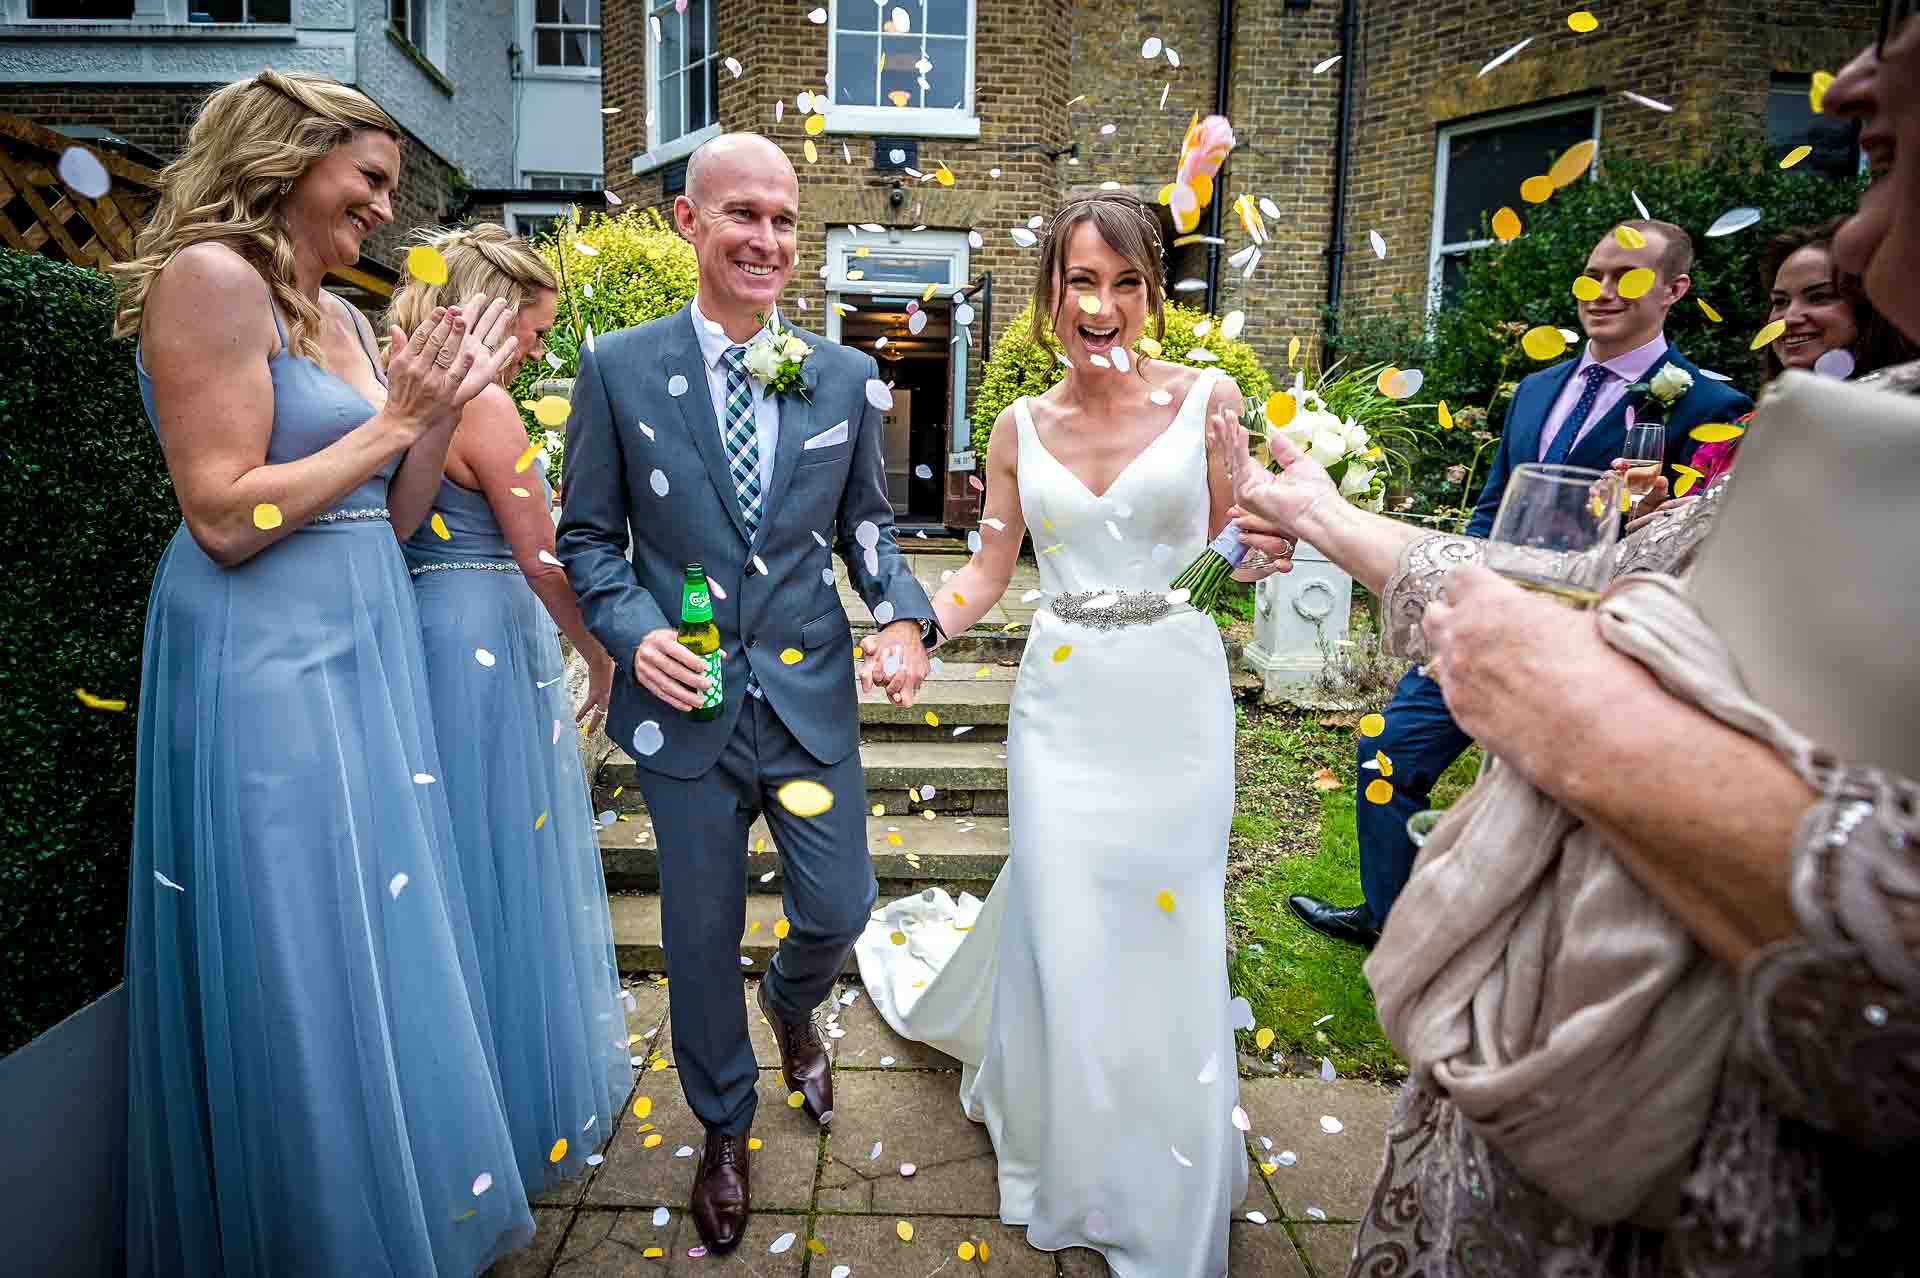 Confetti being thrown on newly-weds in garden of Winchester House